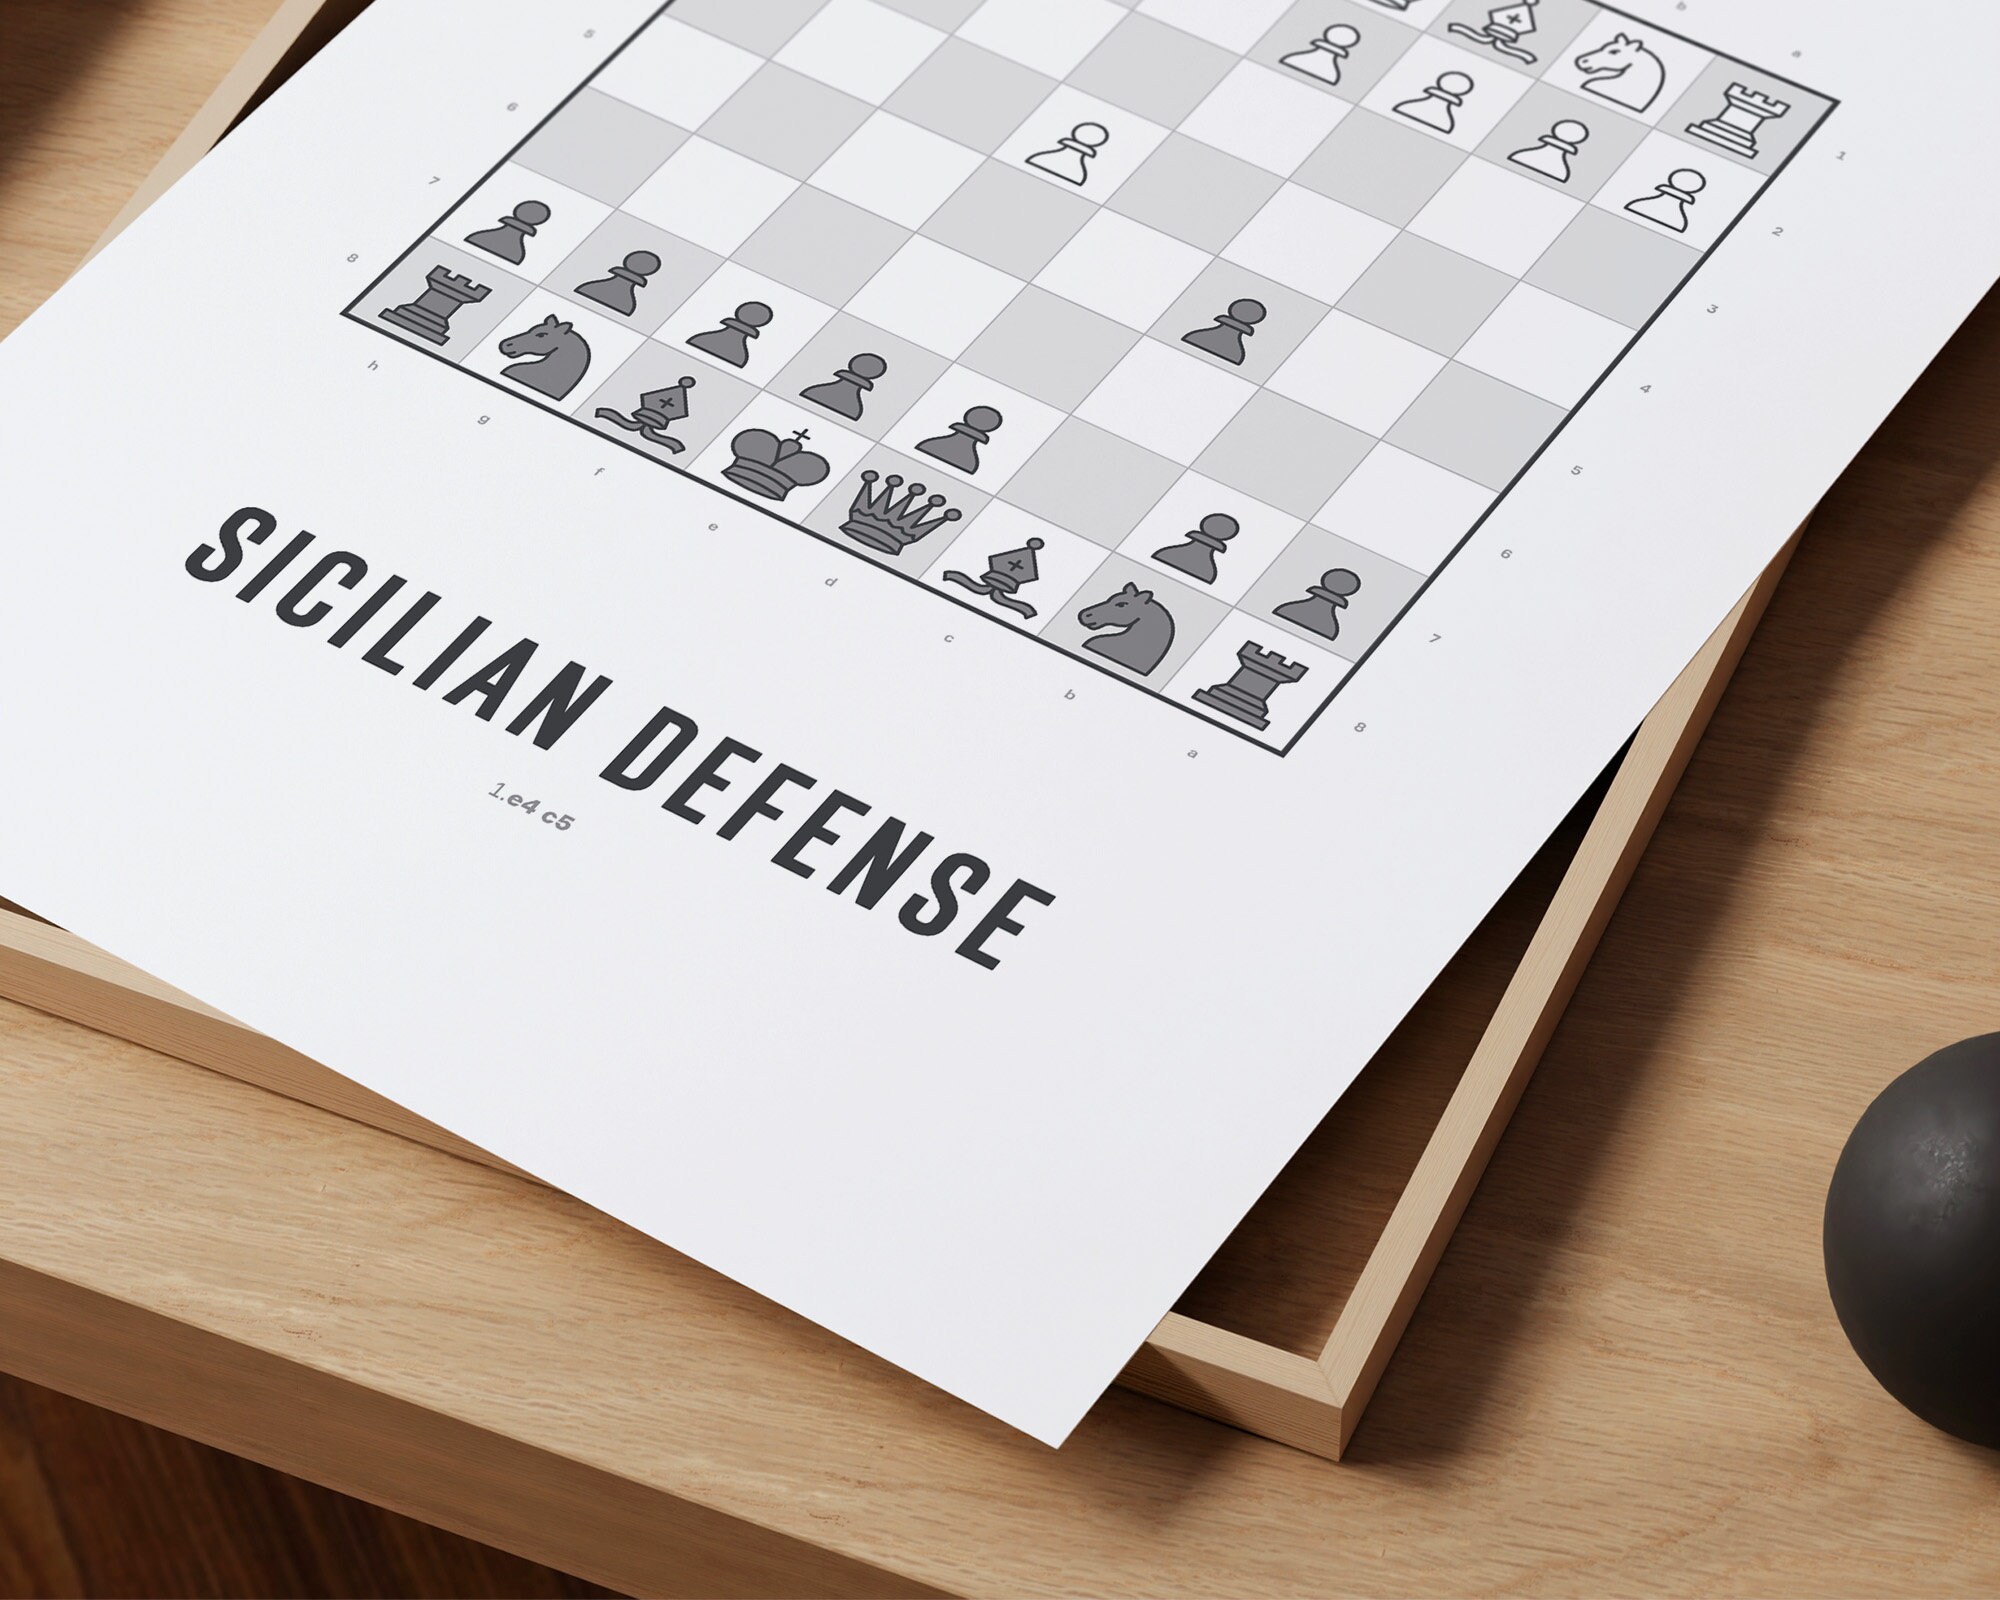 Sicilian Defense Chess' Poster, picture, metal print, paint by IMR Designs